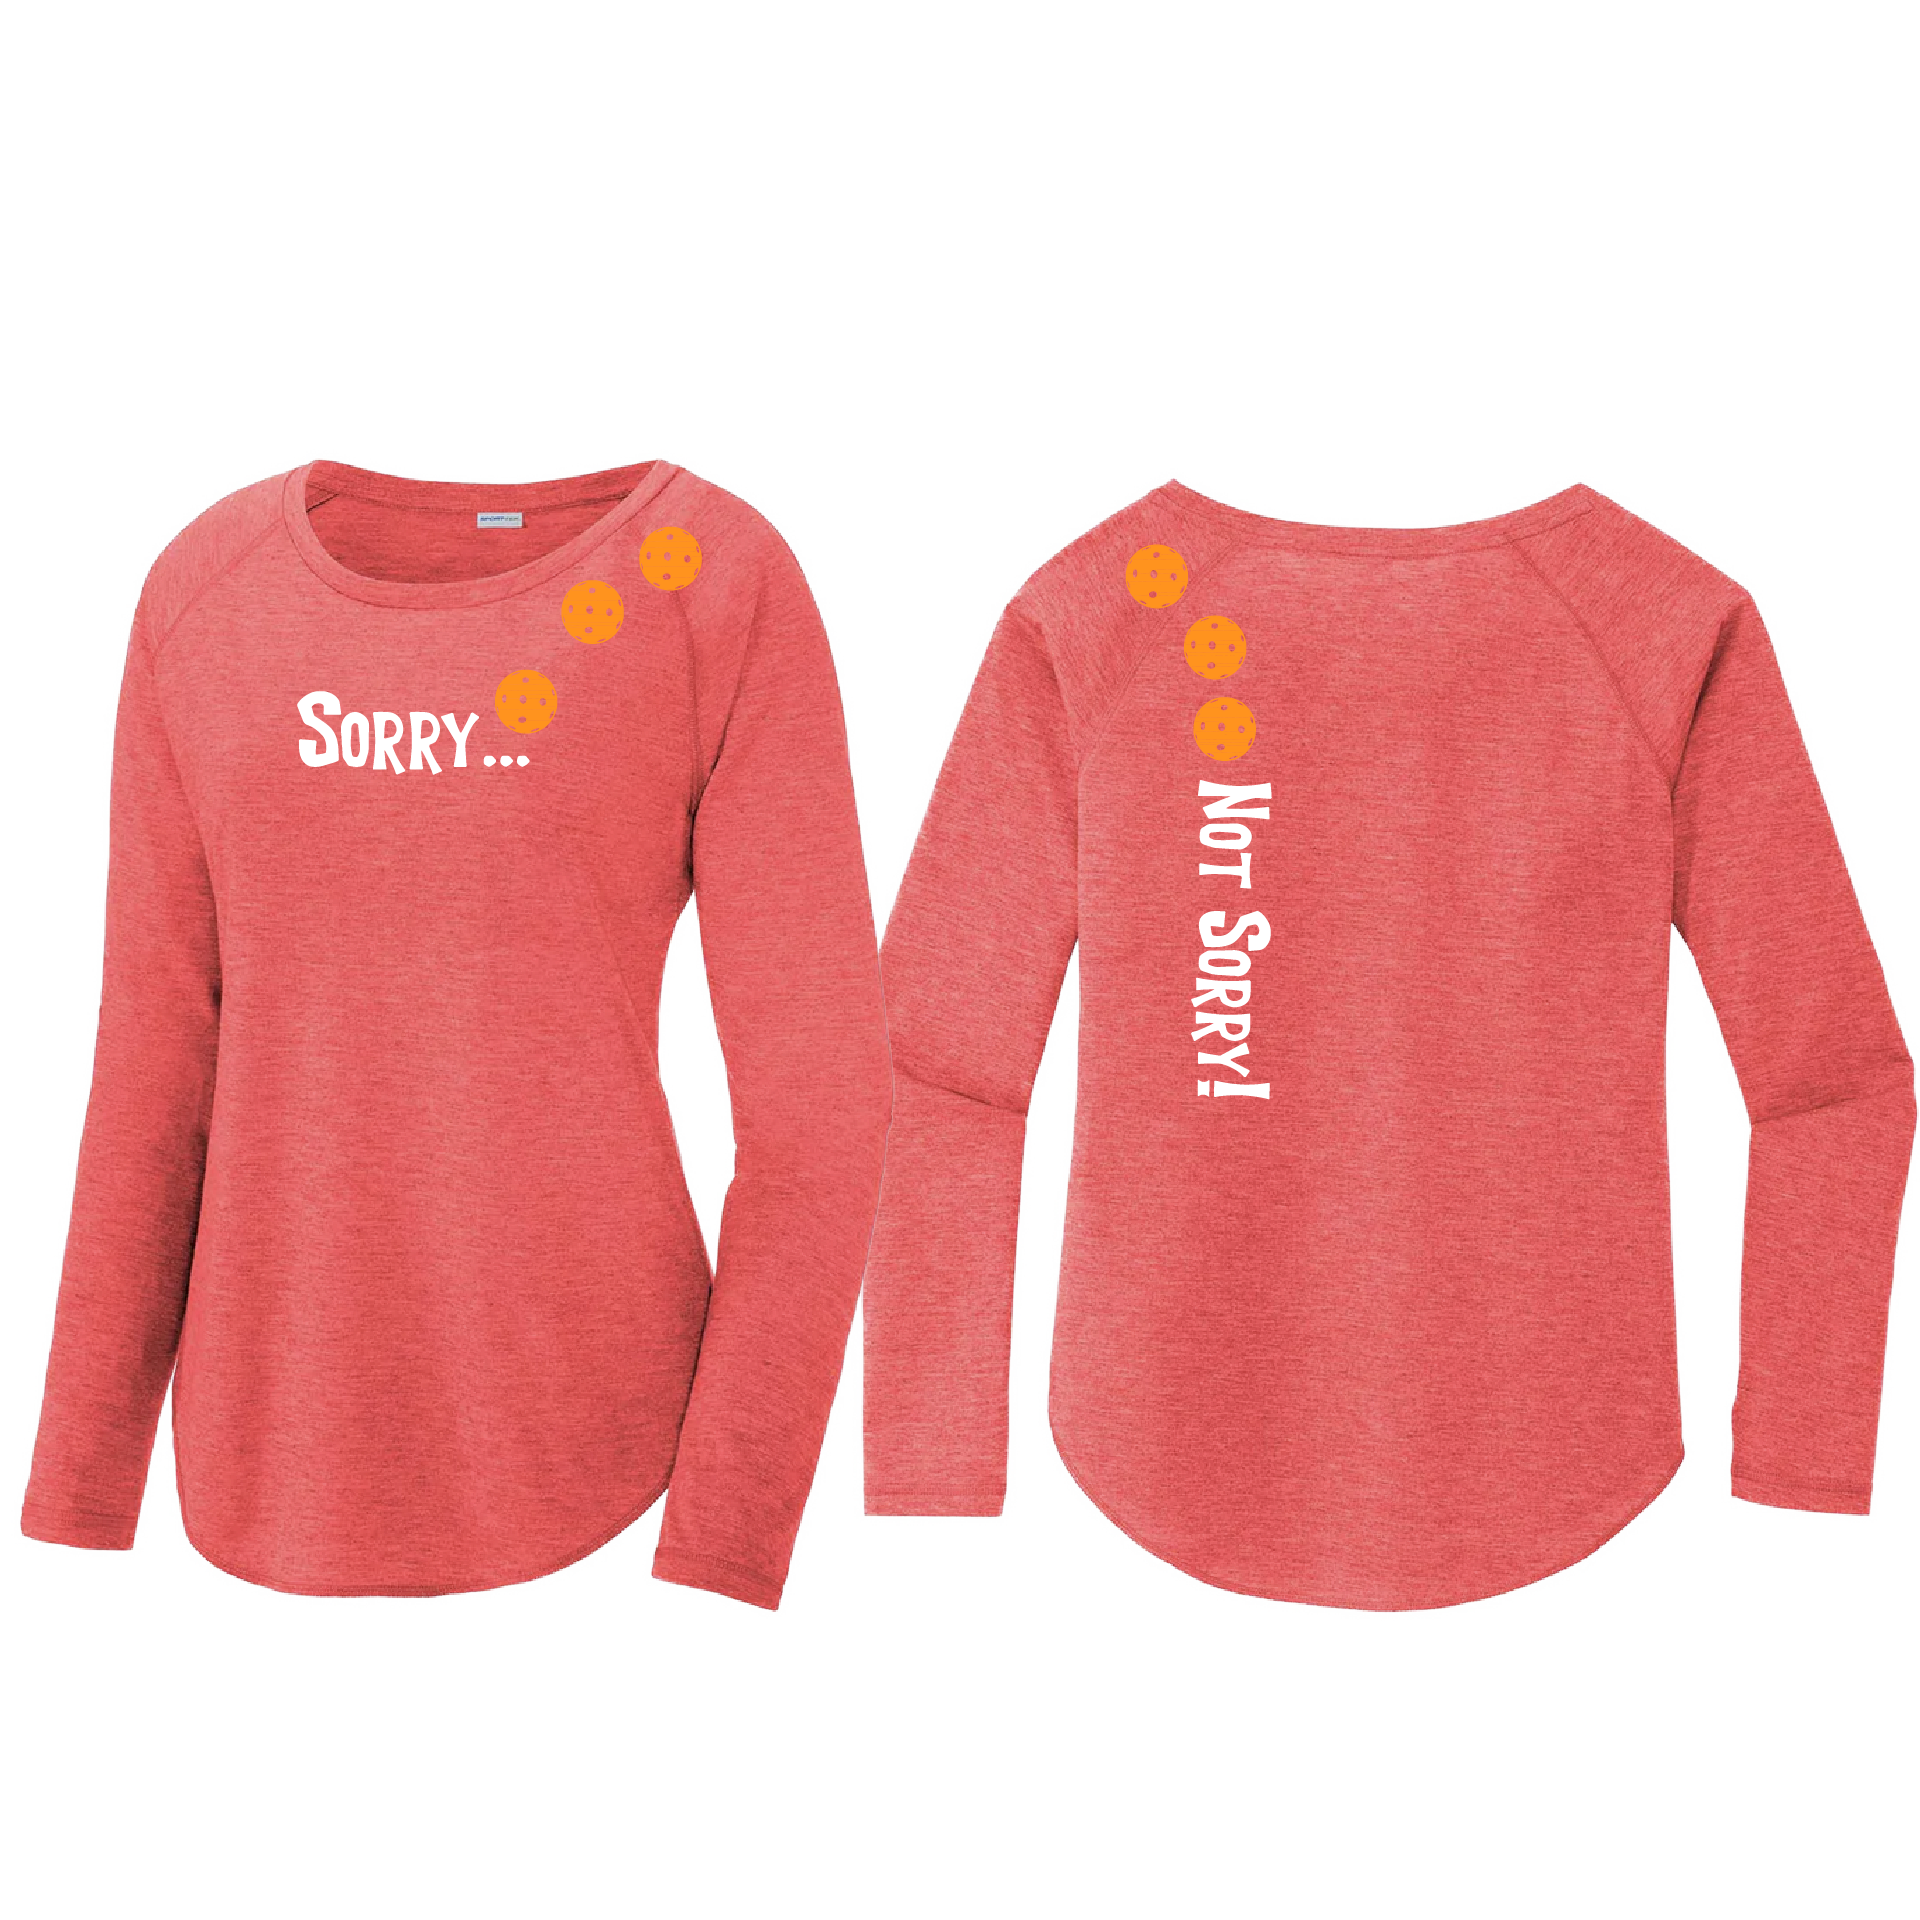 Pickleball Design: Sorry...Not Sorry with Customizable Ball Color – Orange, Green or Purple Balls.   Women's Styles: Long-Sleeve Scoop-Neck  Turn up the volume in this Women's shirt with its perfect mix of softness and attitude. Material is ultra-comfortable with moisture wicking properties and tri-blend softness. PosiCharge technology locks in color. Highly breathable and lightweight.